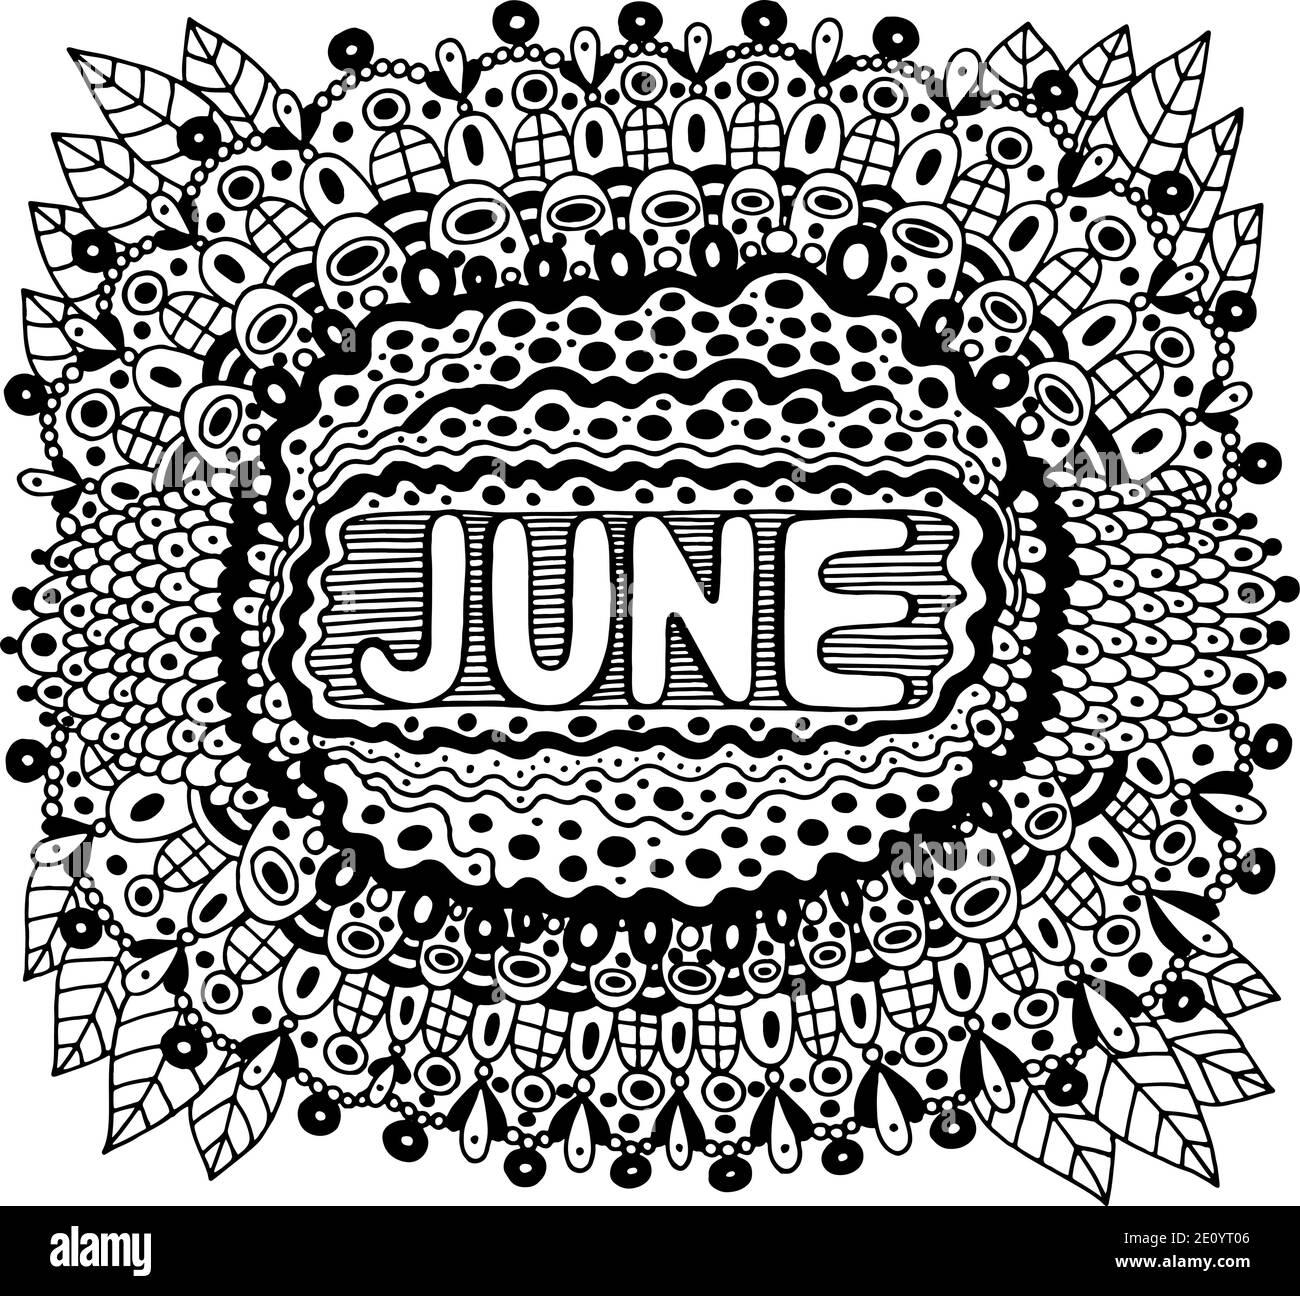 June Coloring Page For Adults Mandala With Months Of The Year Calendar Coloring Book Zentangle Style Art Therapy Coloring Sheet Vector Illustrat Stock Vector Image Art Alamy